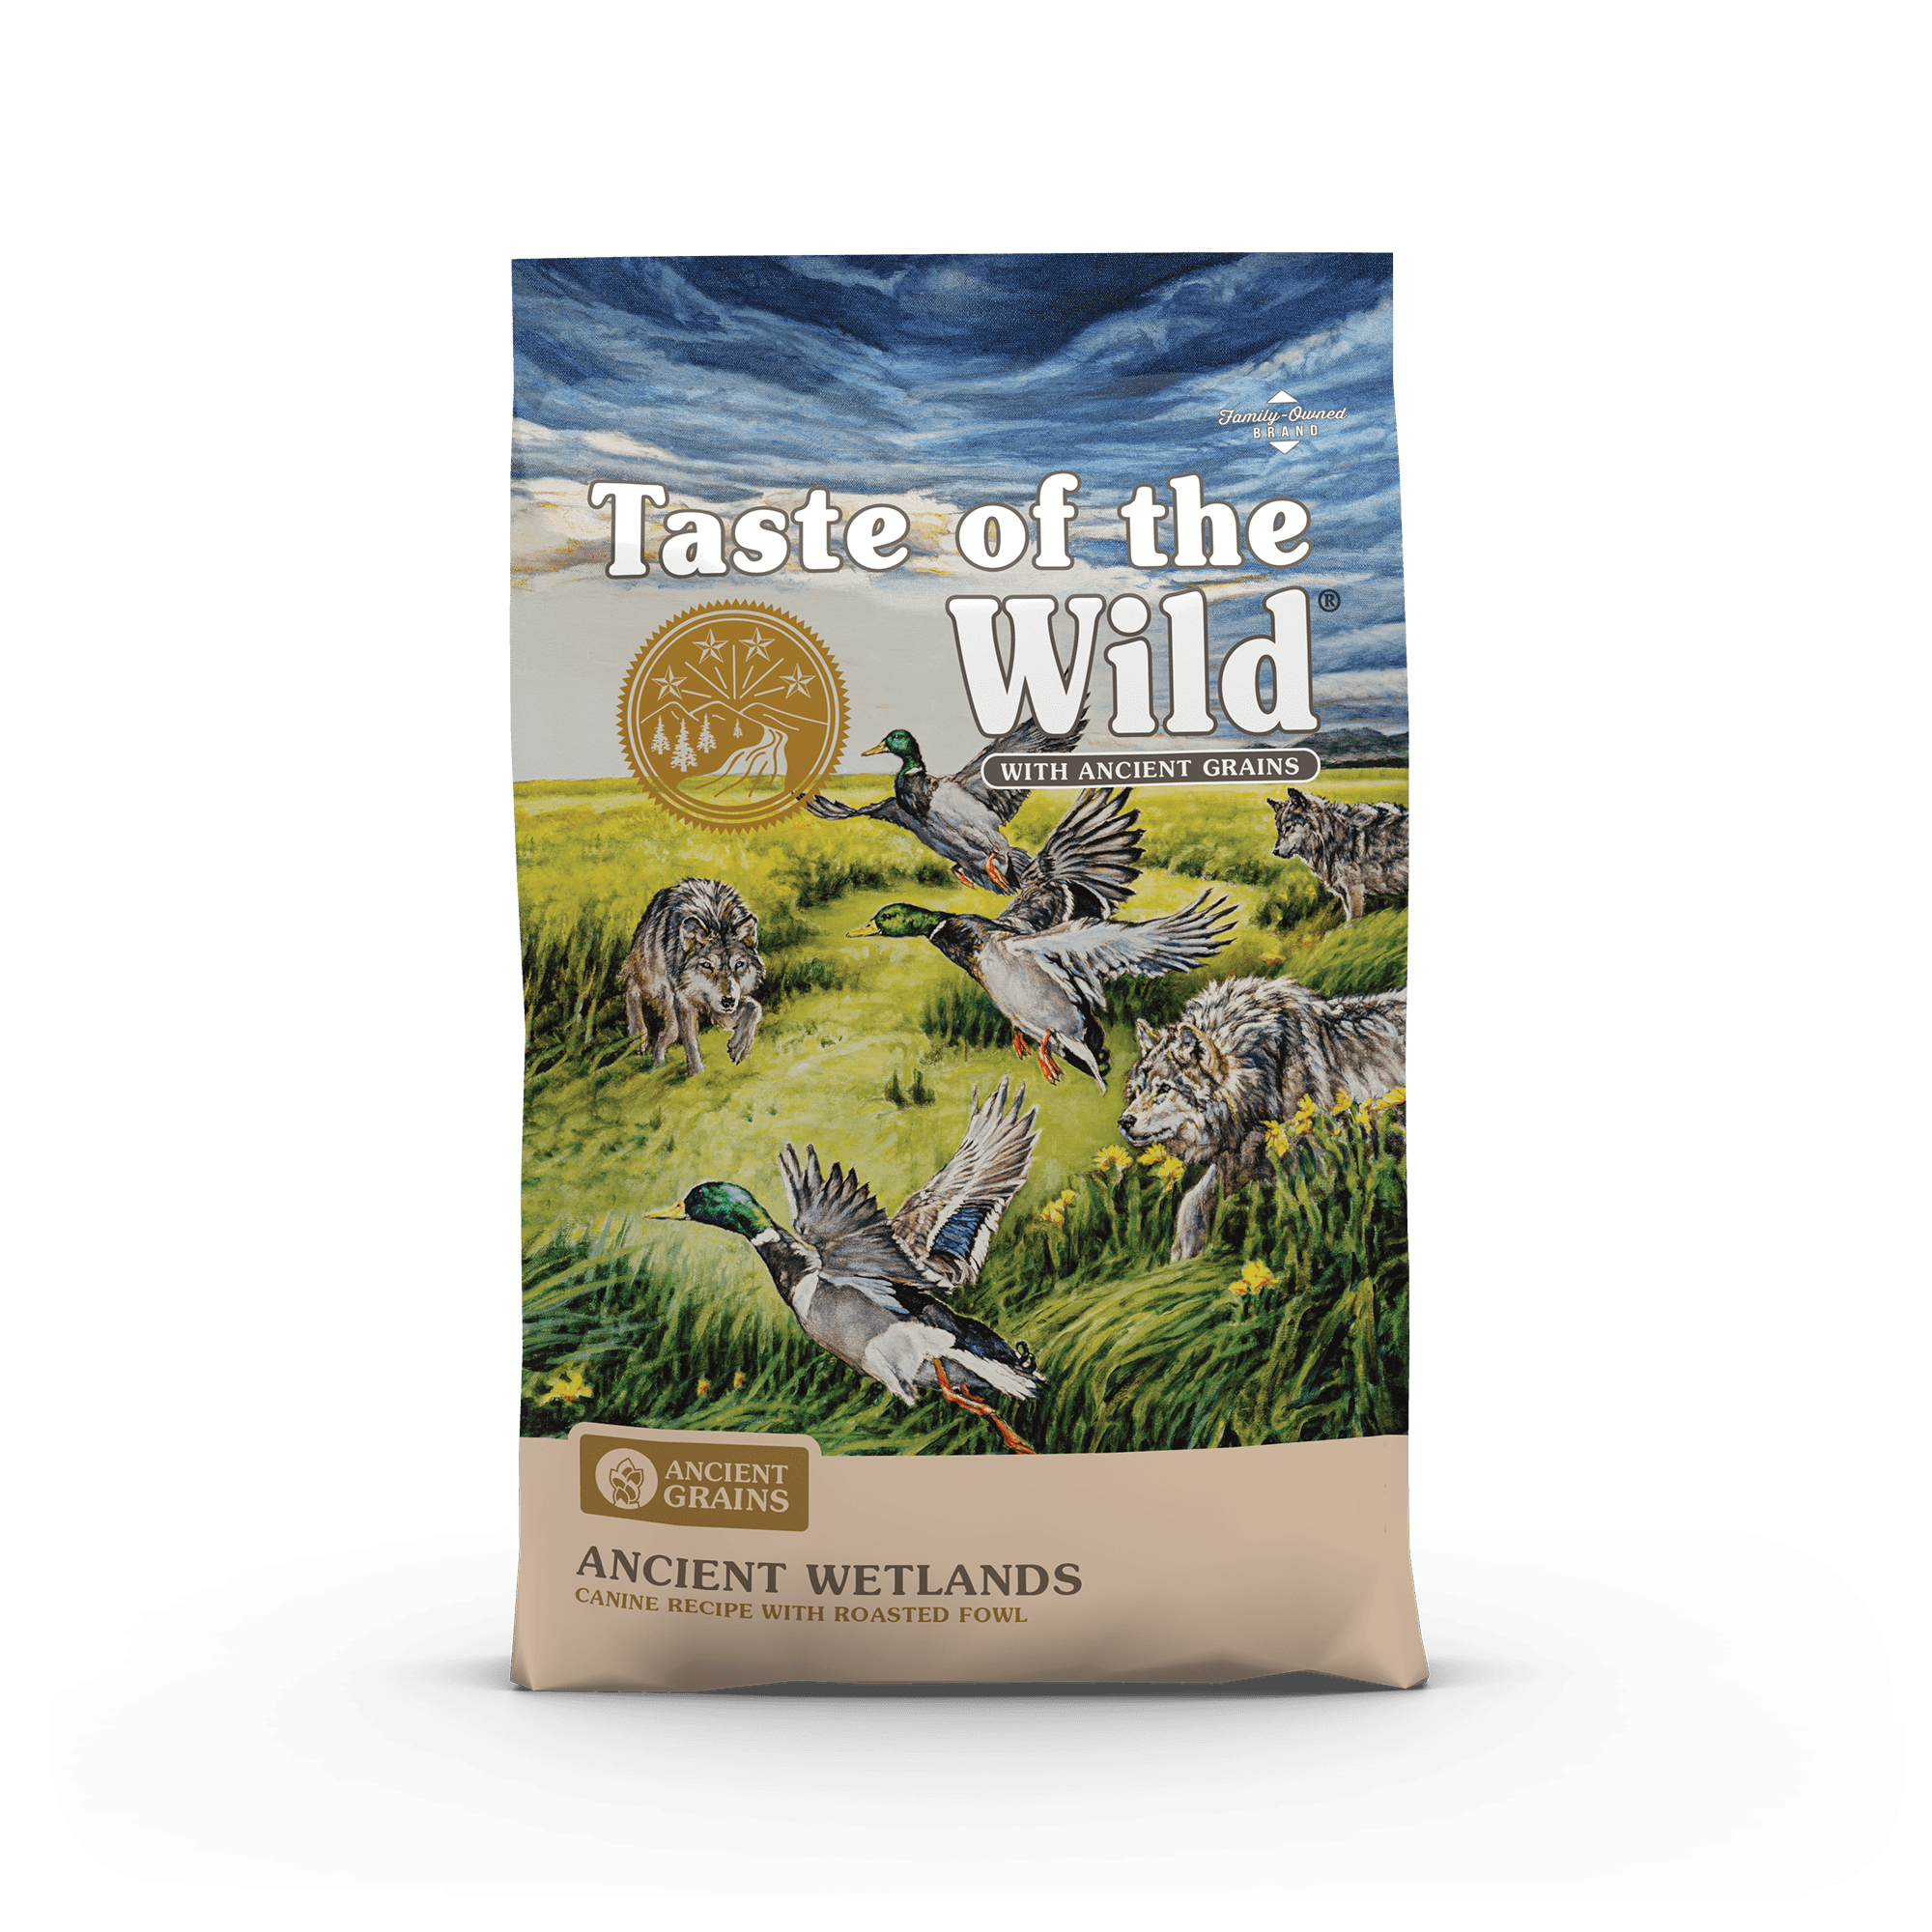 Taste of the Wild Ancient Wetlands Canine Recipe with Roasted Fowl package